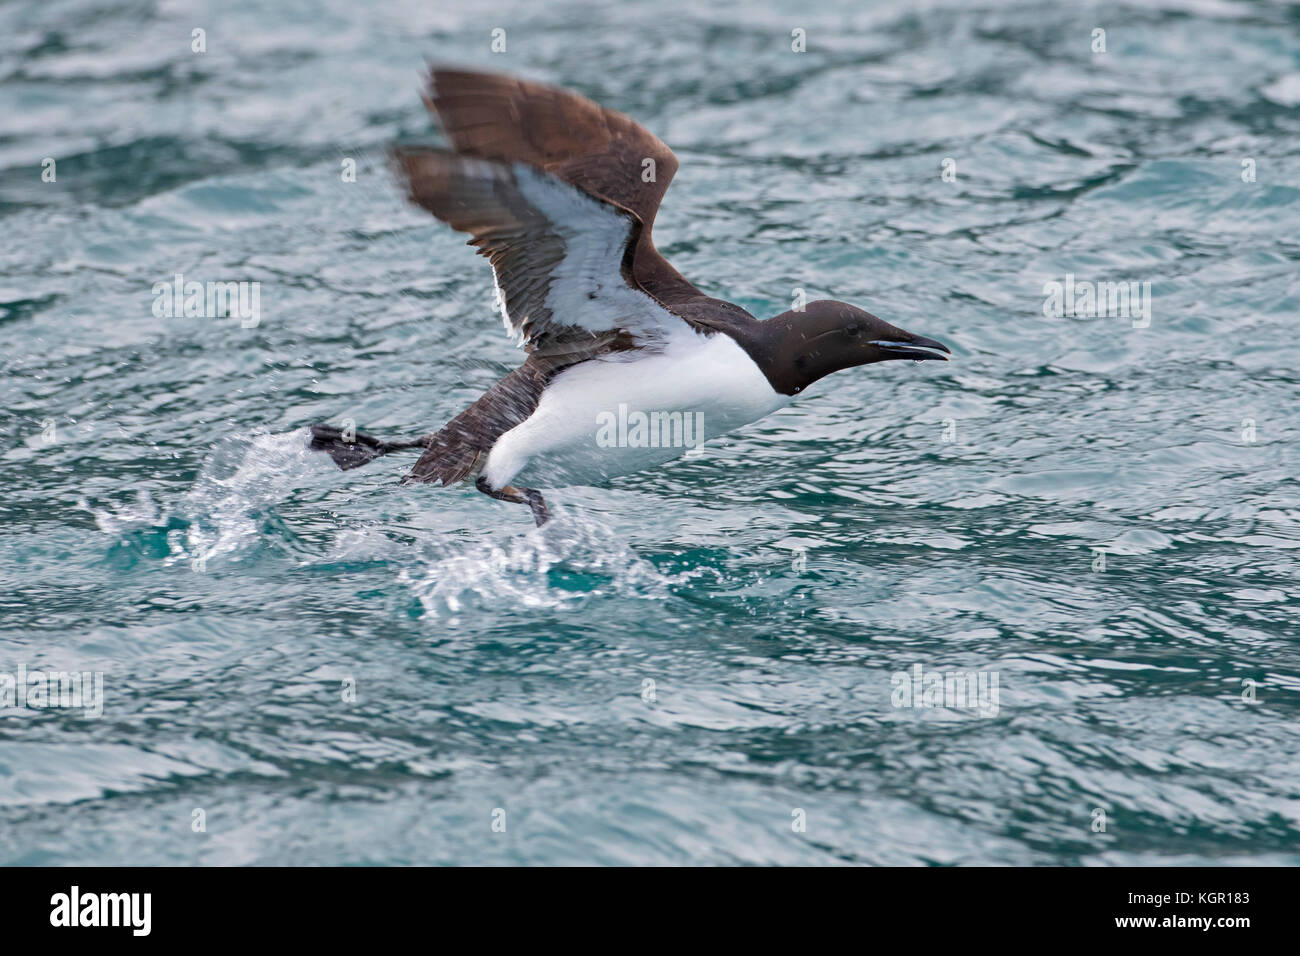 Thick-billed murre / Brünnich's guillemot (Uria lomvia) taking off from sea water, native to the sub-polar regions of the Northern Hemisphere Stock Photo